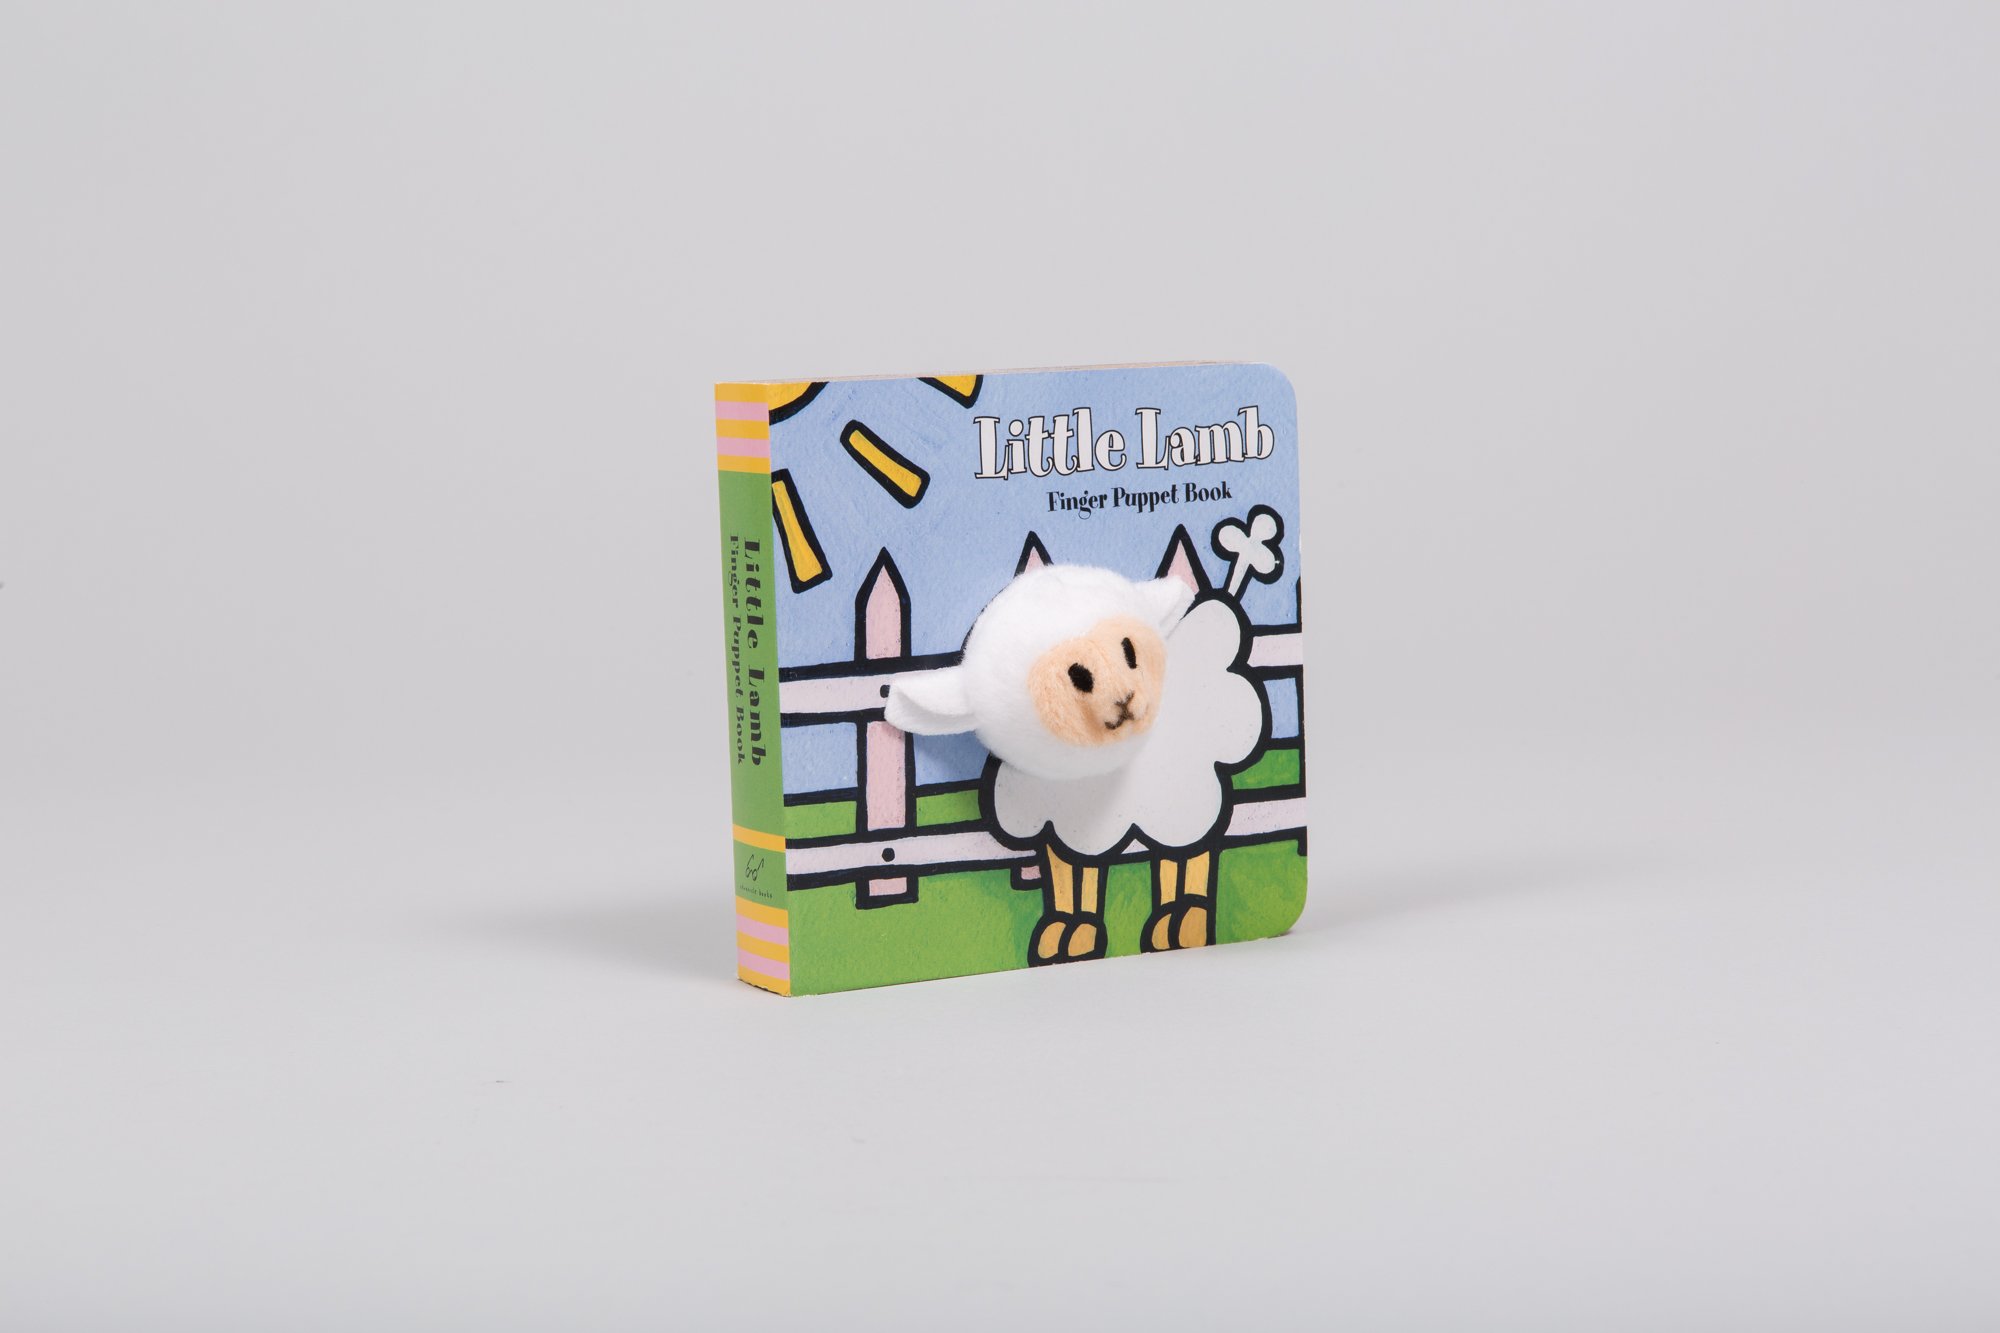 Little Lamb: Finger Puppet Book: (Finger Puppet Book for Toddlers and Babies, Baby Books for First Year, Animal Finger Puppets) (Little Finger Puppet Board Books, FING)